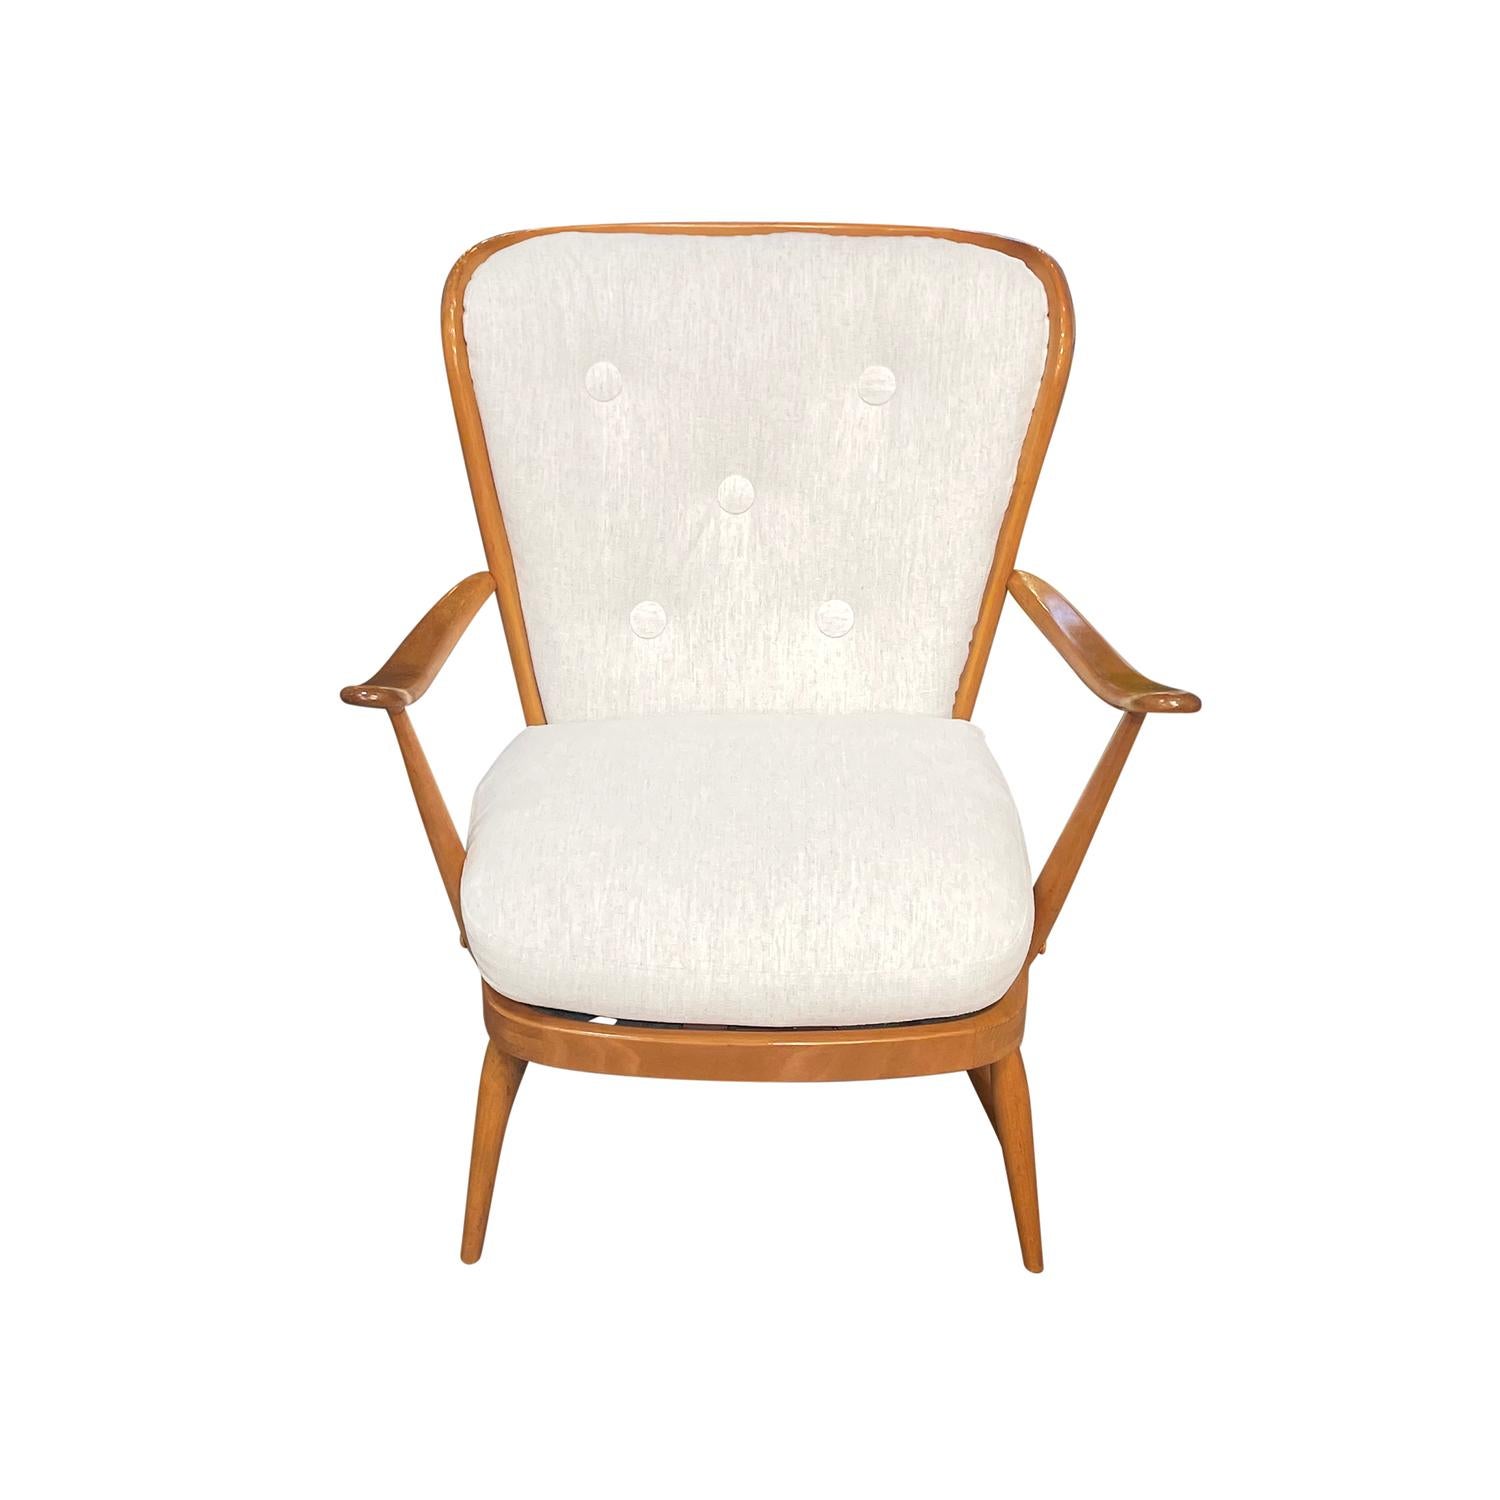 A single, vintage Mid-Century modern English armchair made of hand crafted polished Beechwood, in good condition. The low British side chair has an open, spindled reclined backrest with arched, outstretched armrests. The back rest  is particularized